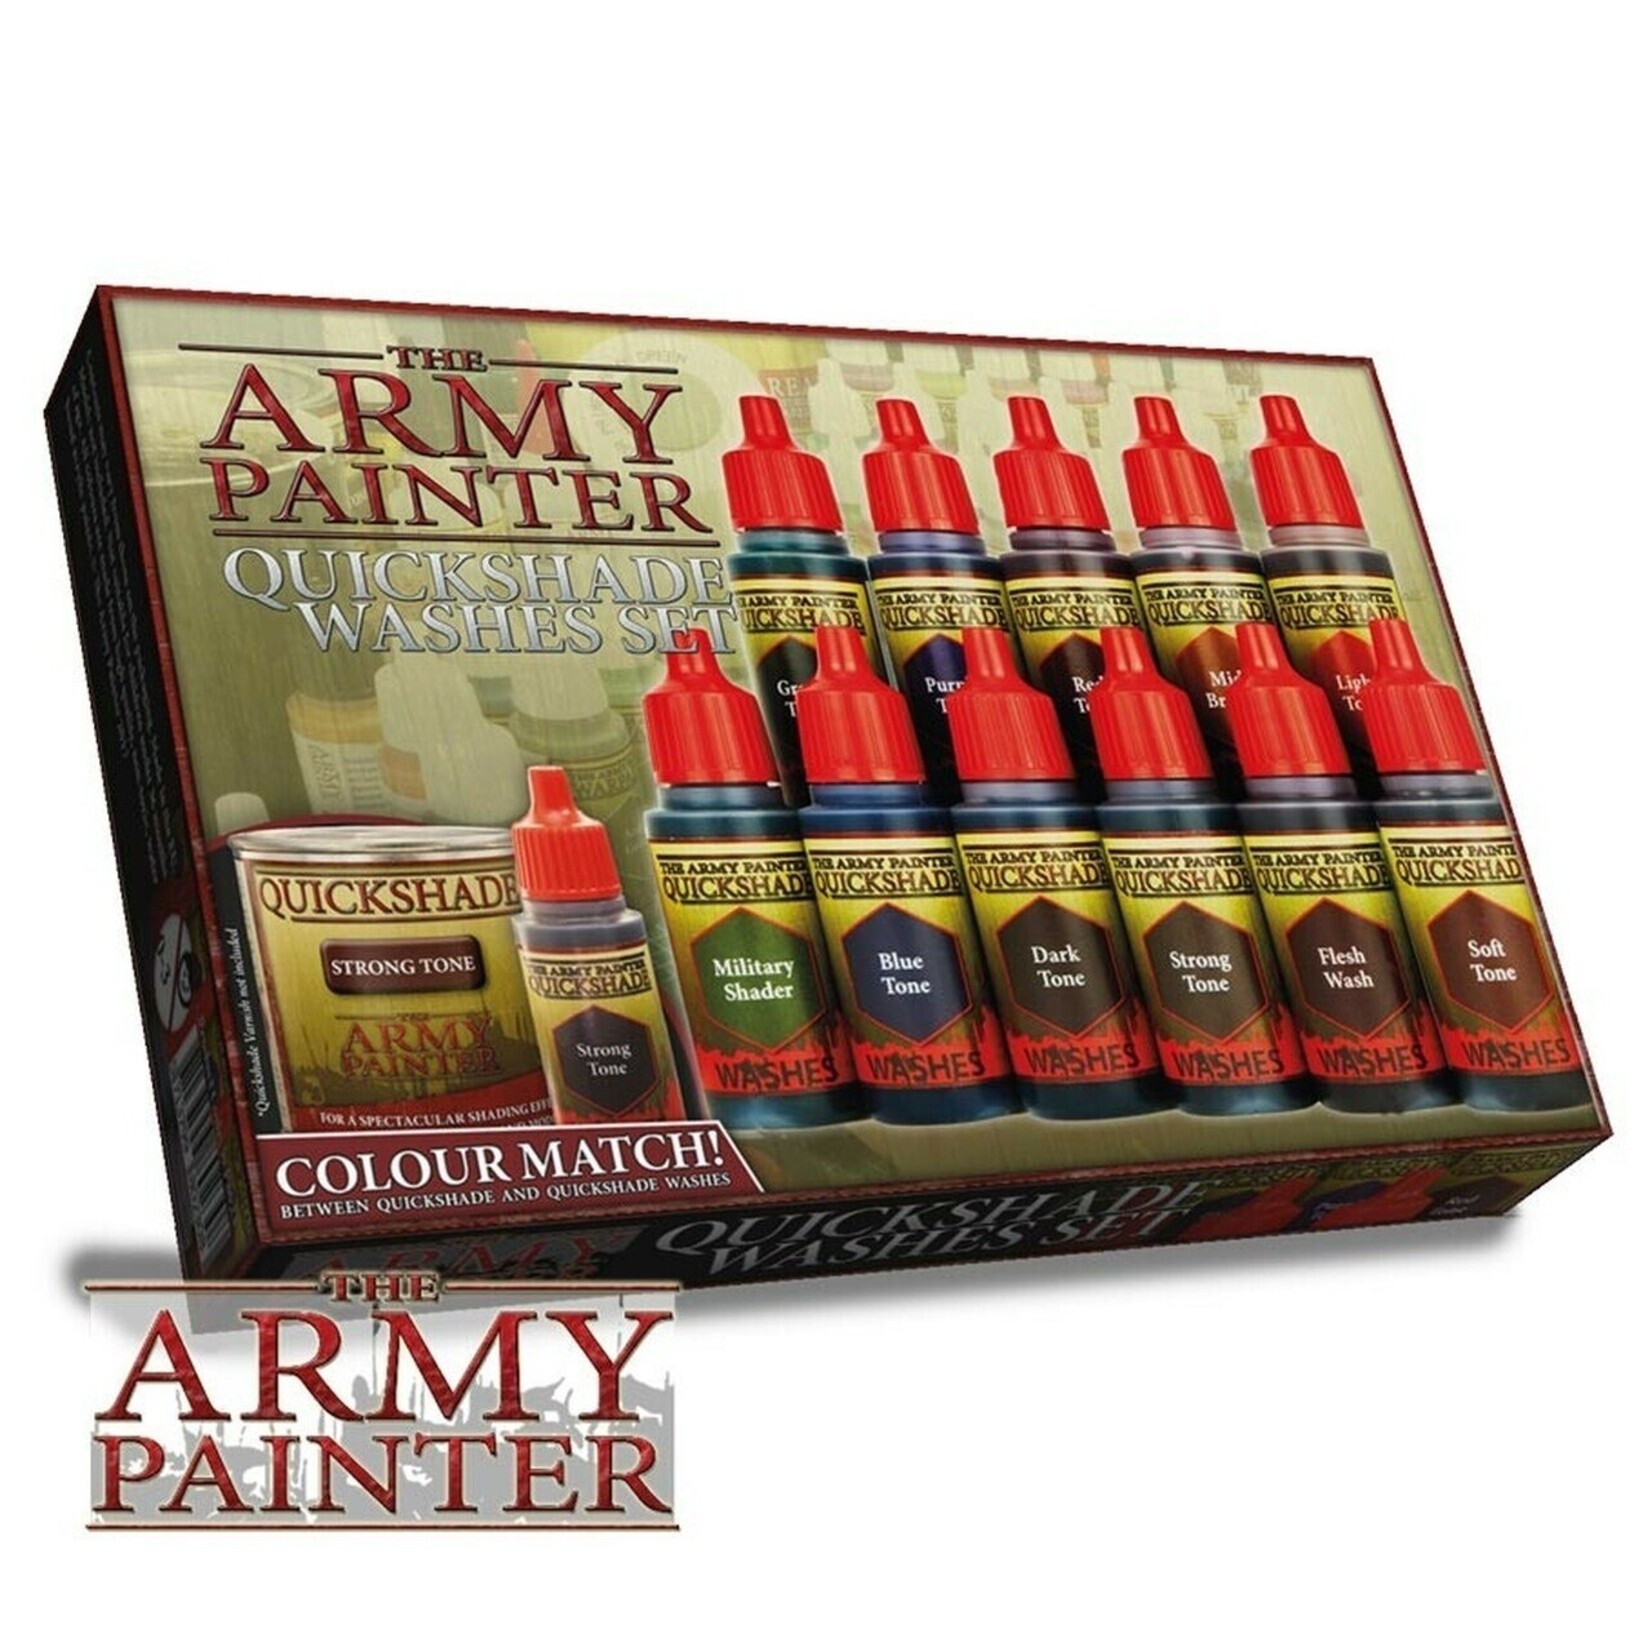 The Army Painter Army Painter: Quickshade Washes Set